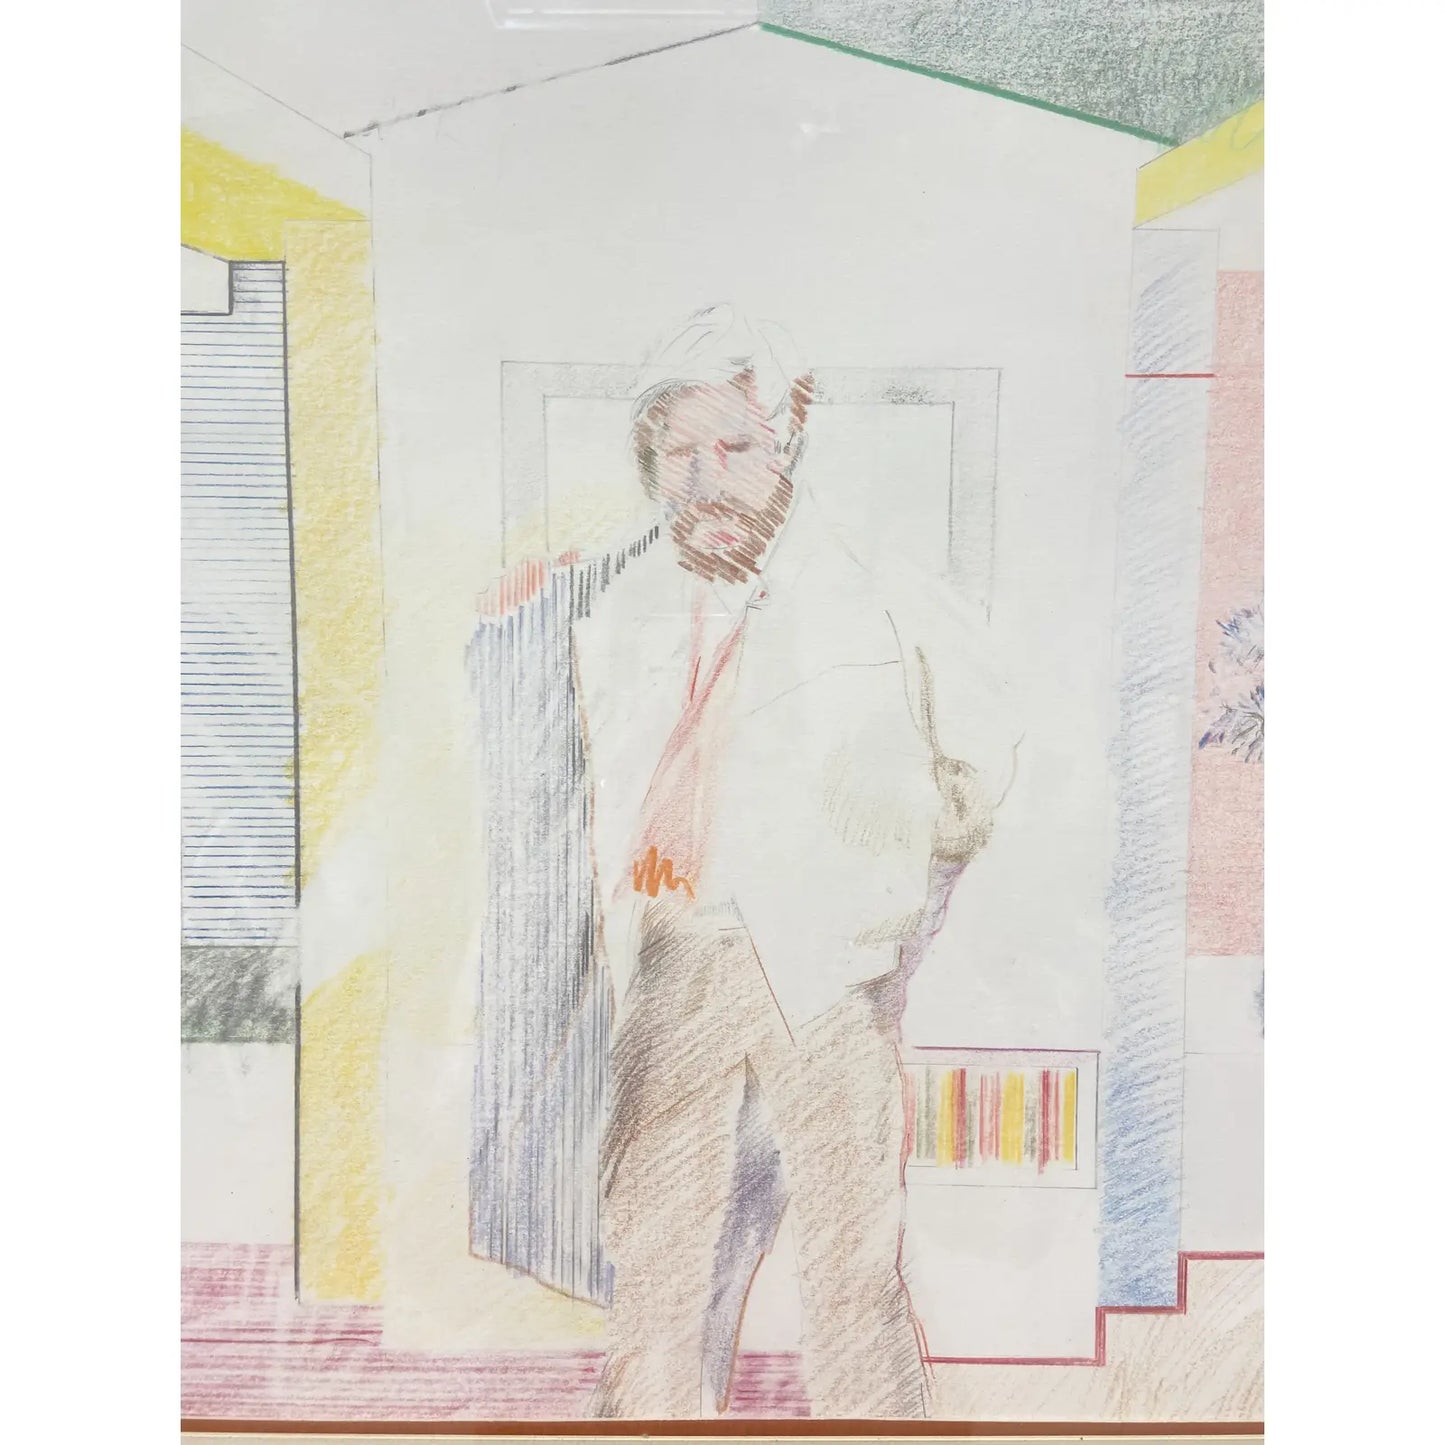 1980S FIGURATIVE MALE IN INTERIOR COLOR PENCIL SKETCH BY PAUL RYBARCZYK, FRAMED